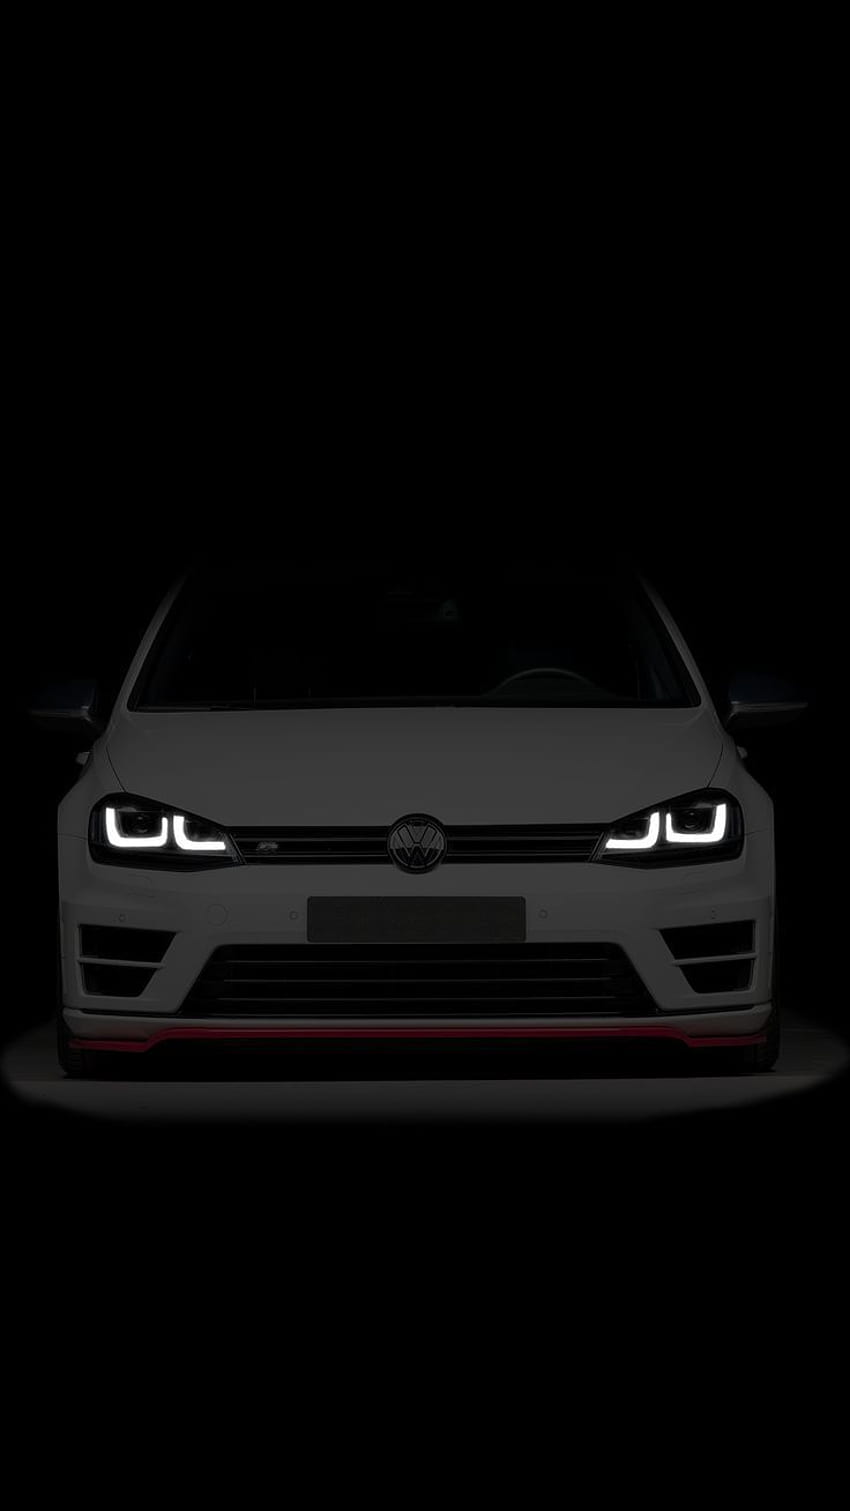 Dark Volkswagen Golf R [] (i.redd.it) Submitted By Jbnnn To R Amoledbackground 0 Comments Original - In 2021. Volkswagen Polo Gti, Volkswagen Polo, Volkswagen, VW Polo HD phone wallpaper